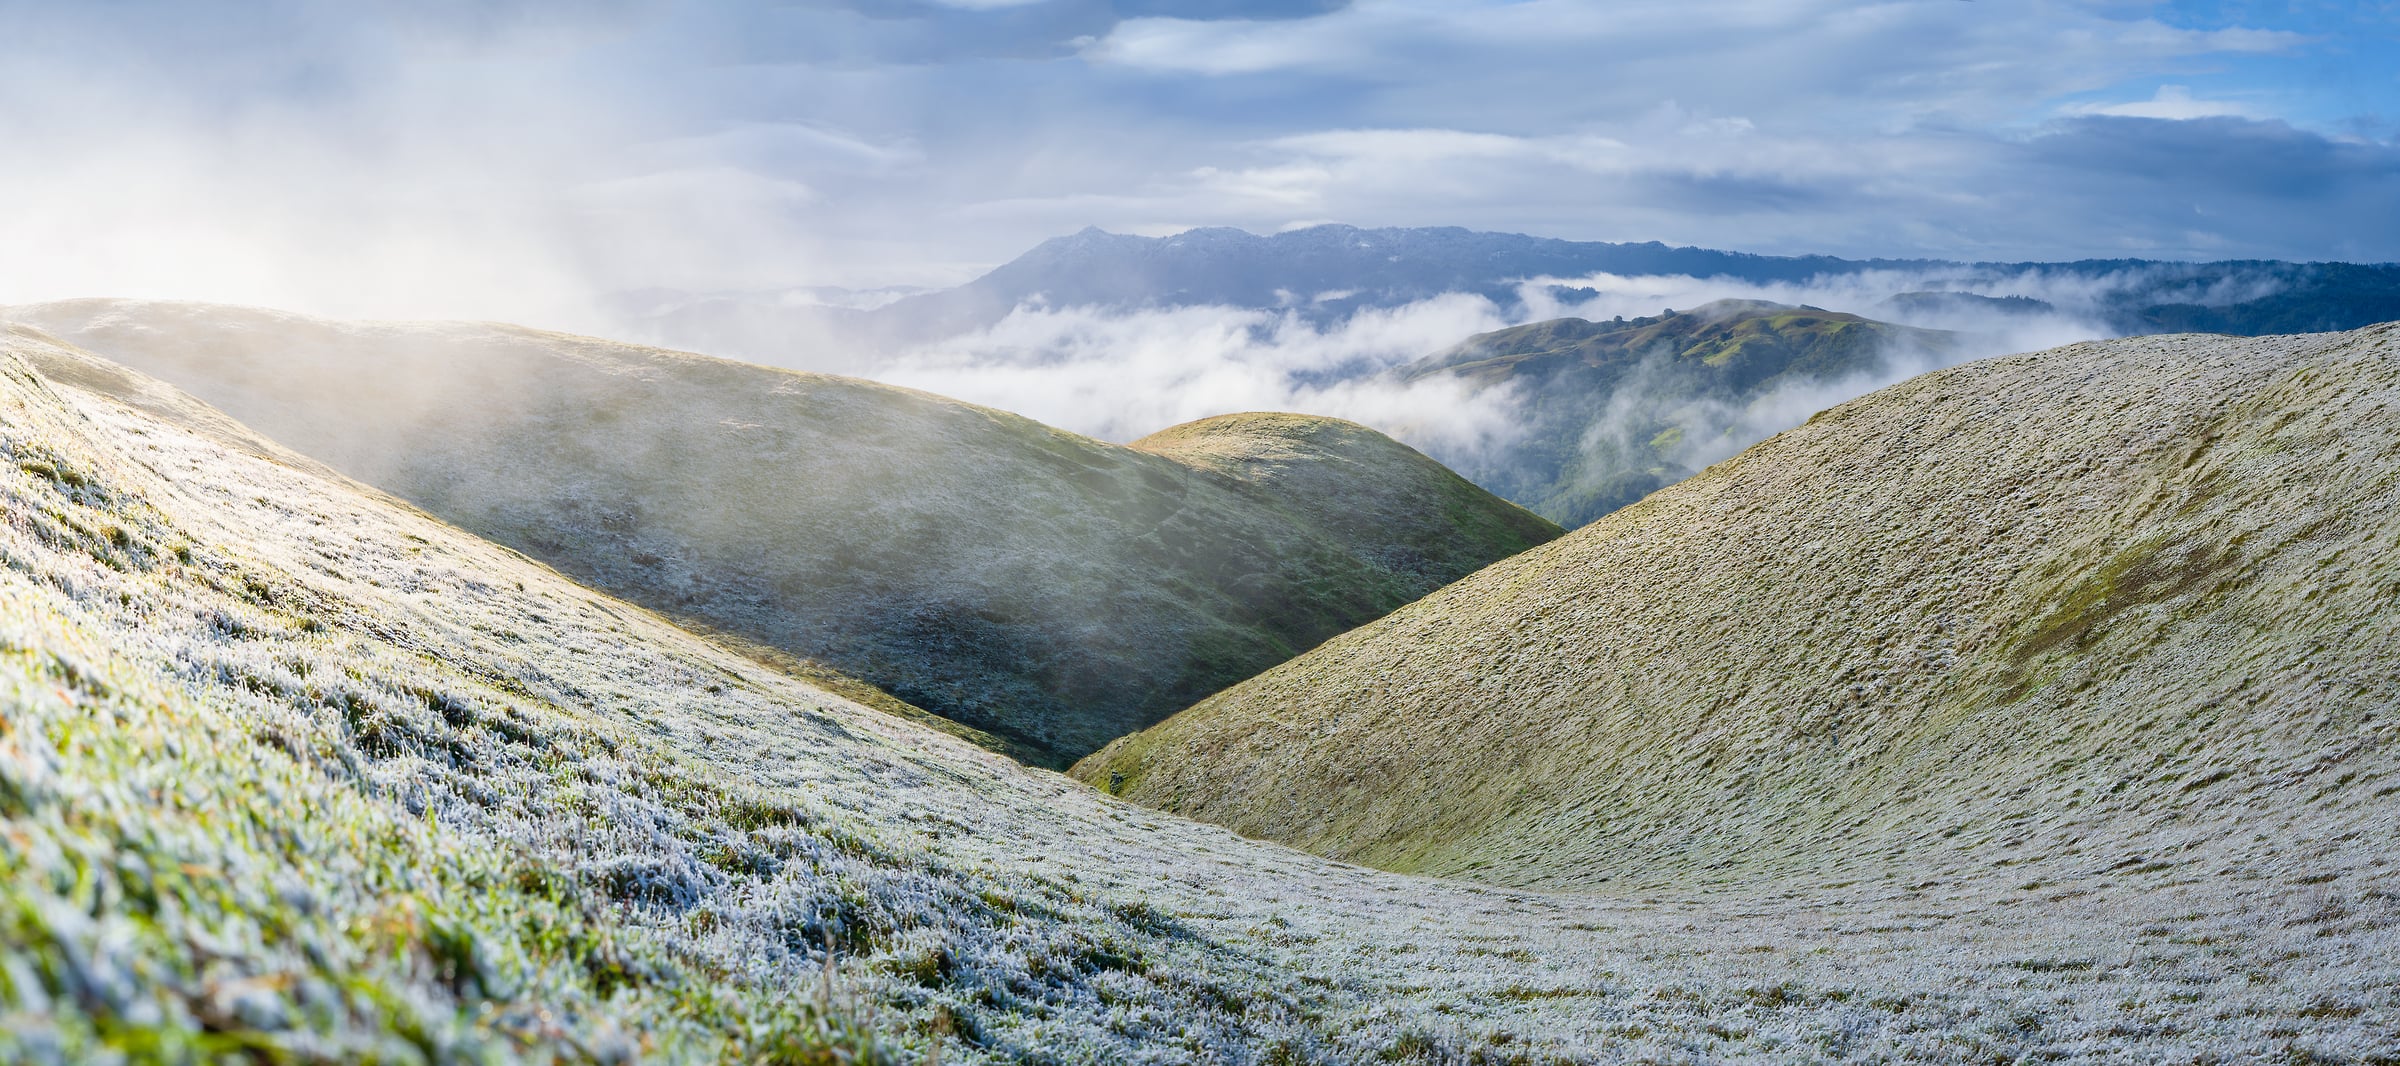 134 megapixels! A very high resolution, large-format VAST photo print of a dusting of snow on rolling hills in Marin, California; landscape photograph created by Jeff Lewis.